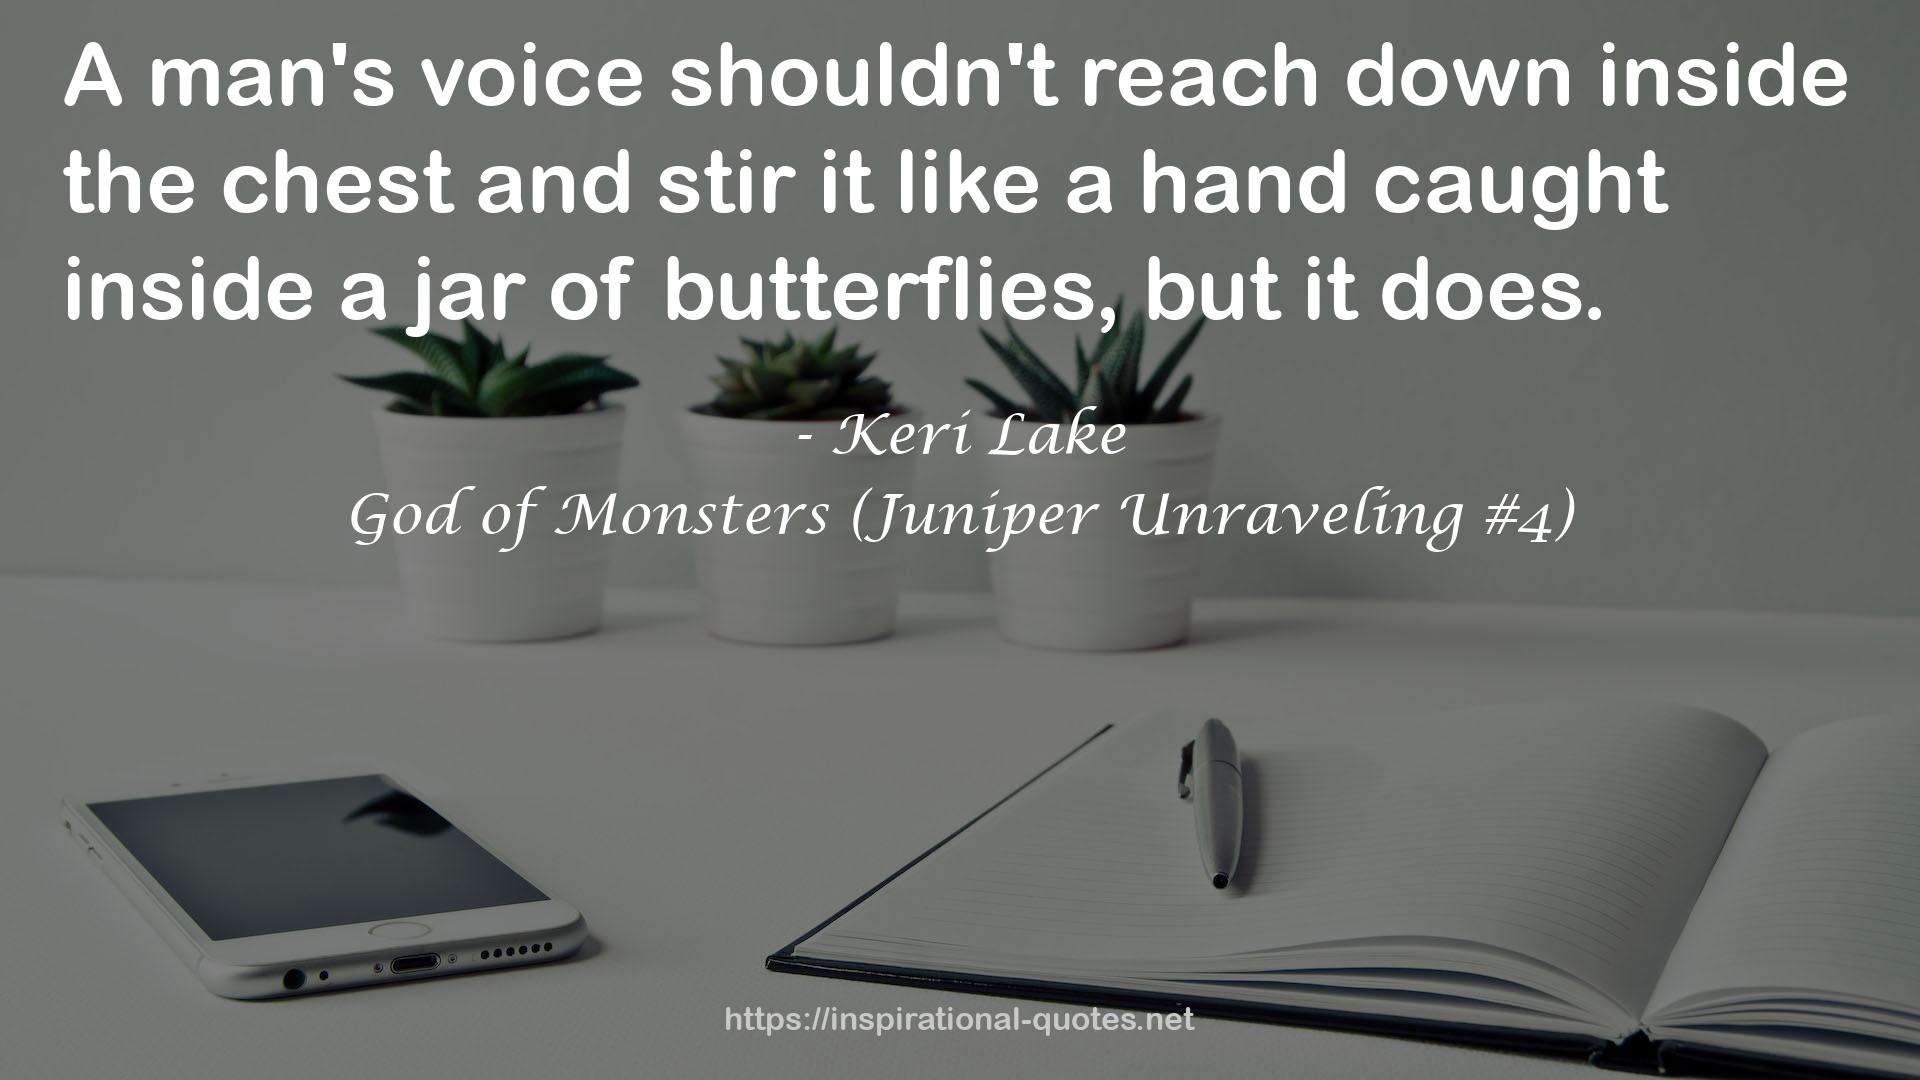 God of Monsters (Juniper Unraveling #4) QUOTES